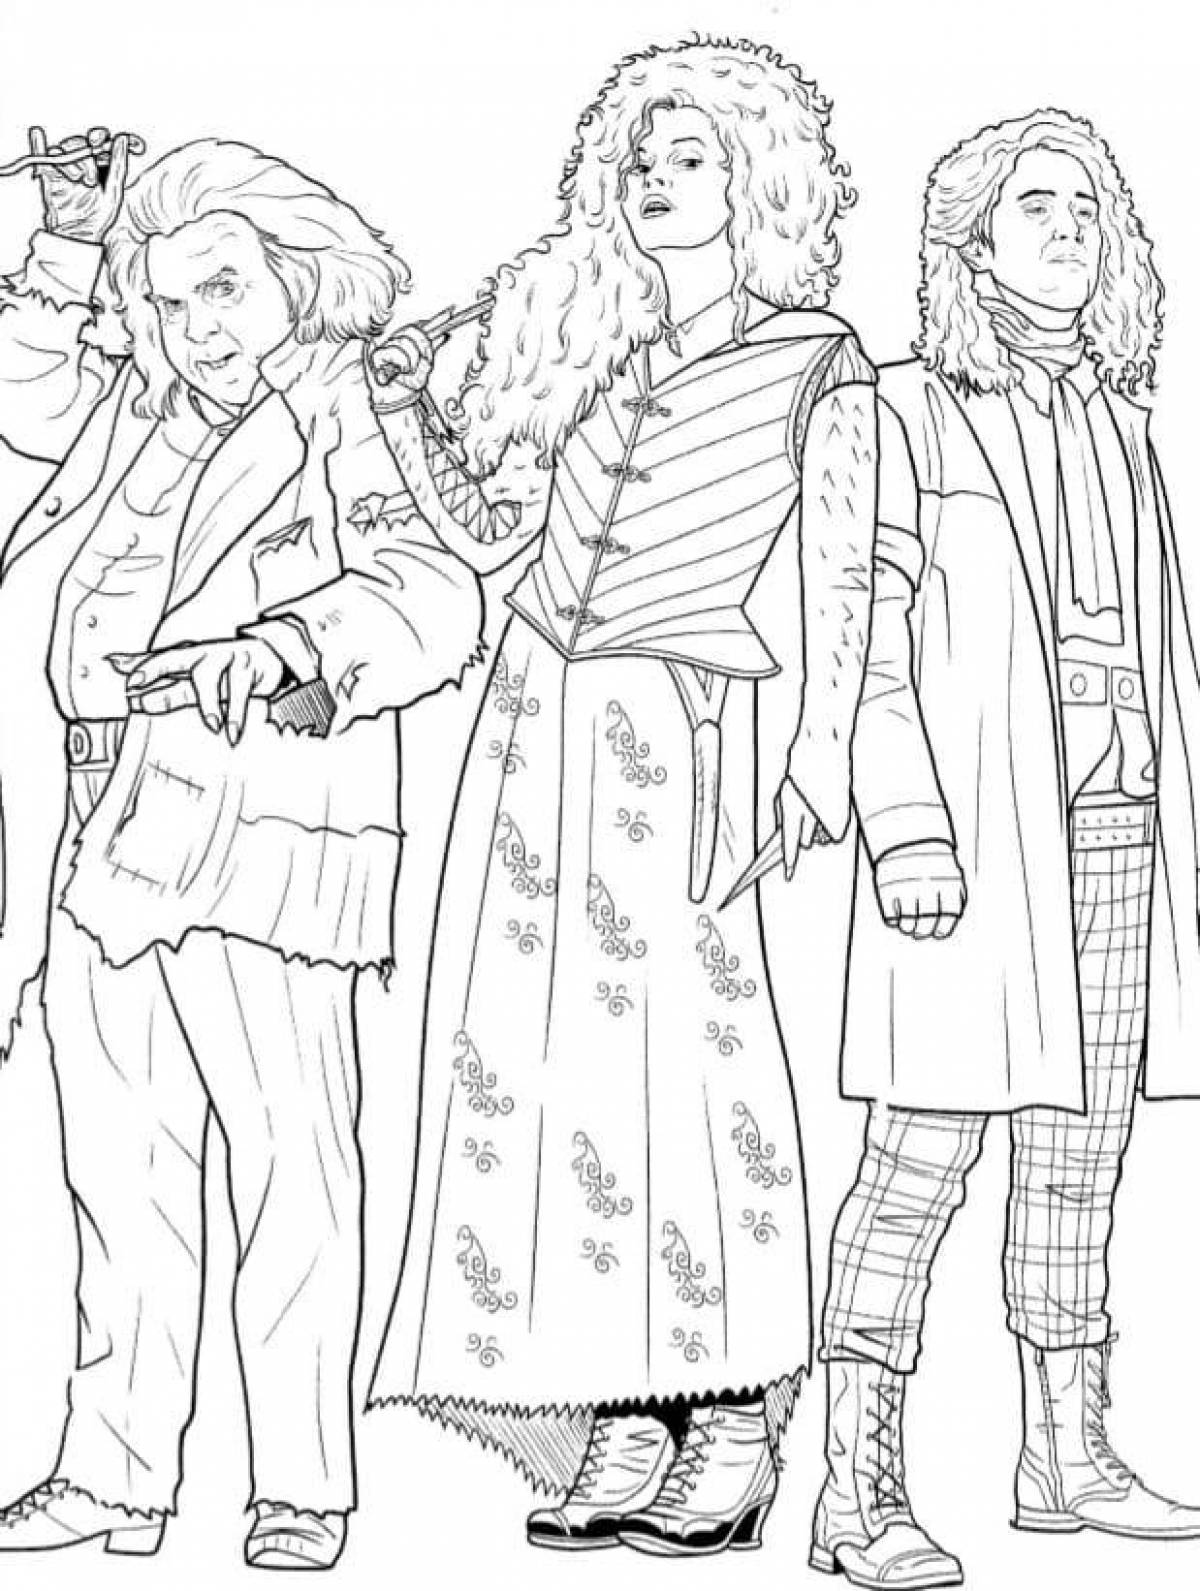 Amazing harry potter spiral coloring page